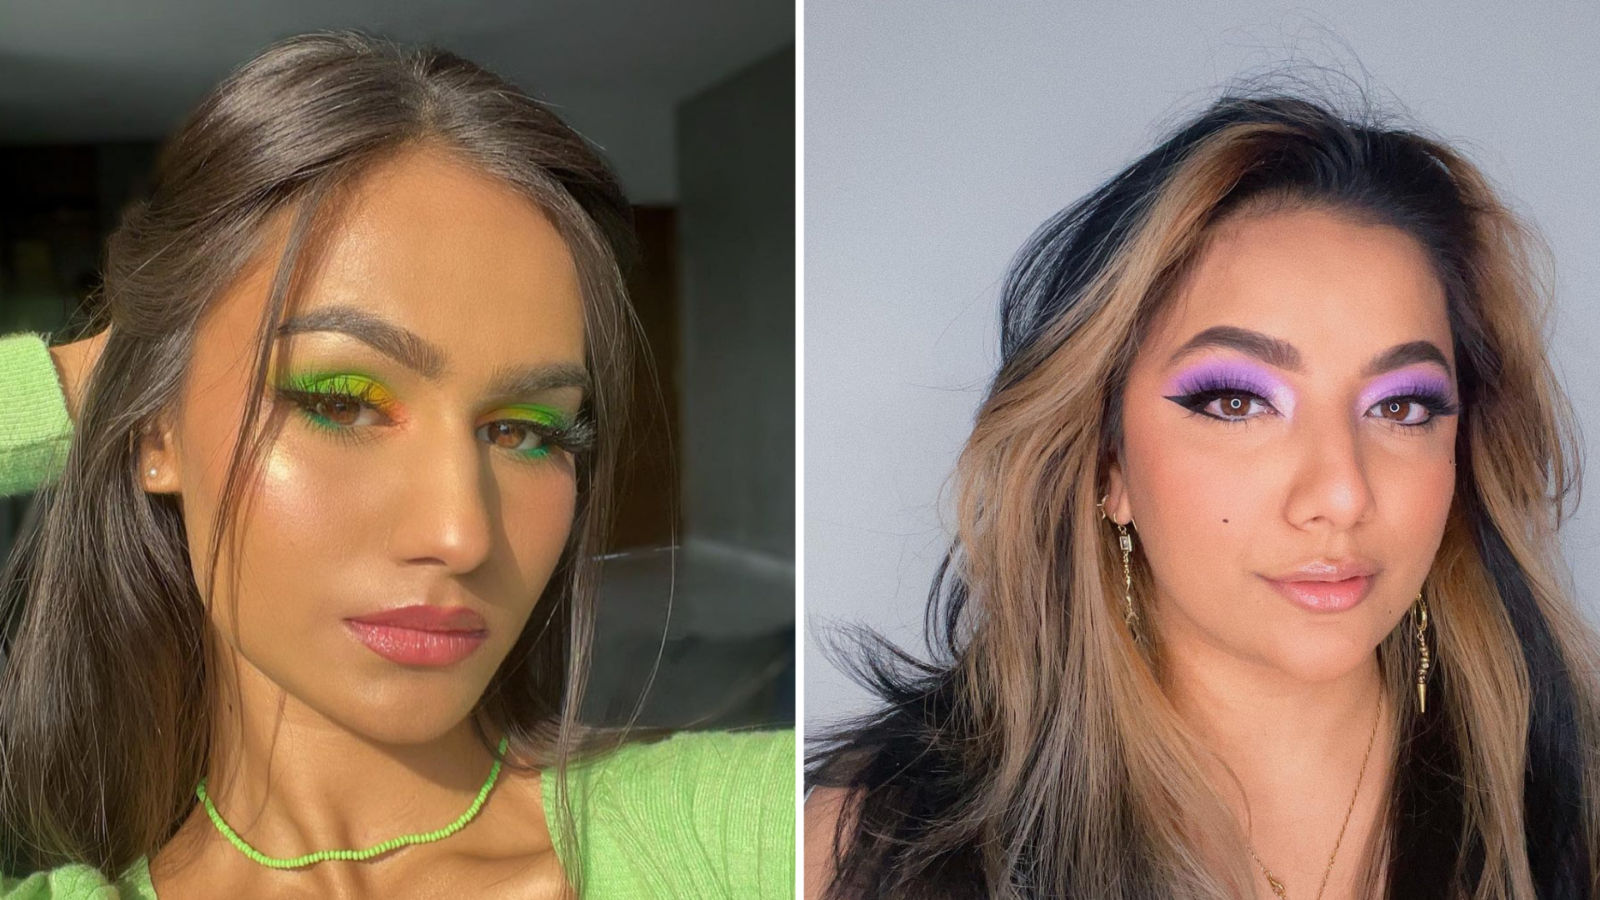 This neon makeup beauty trend makes your skin glow in the dark